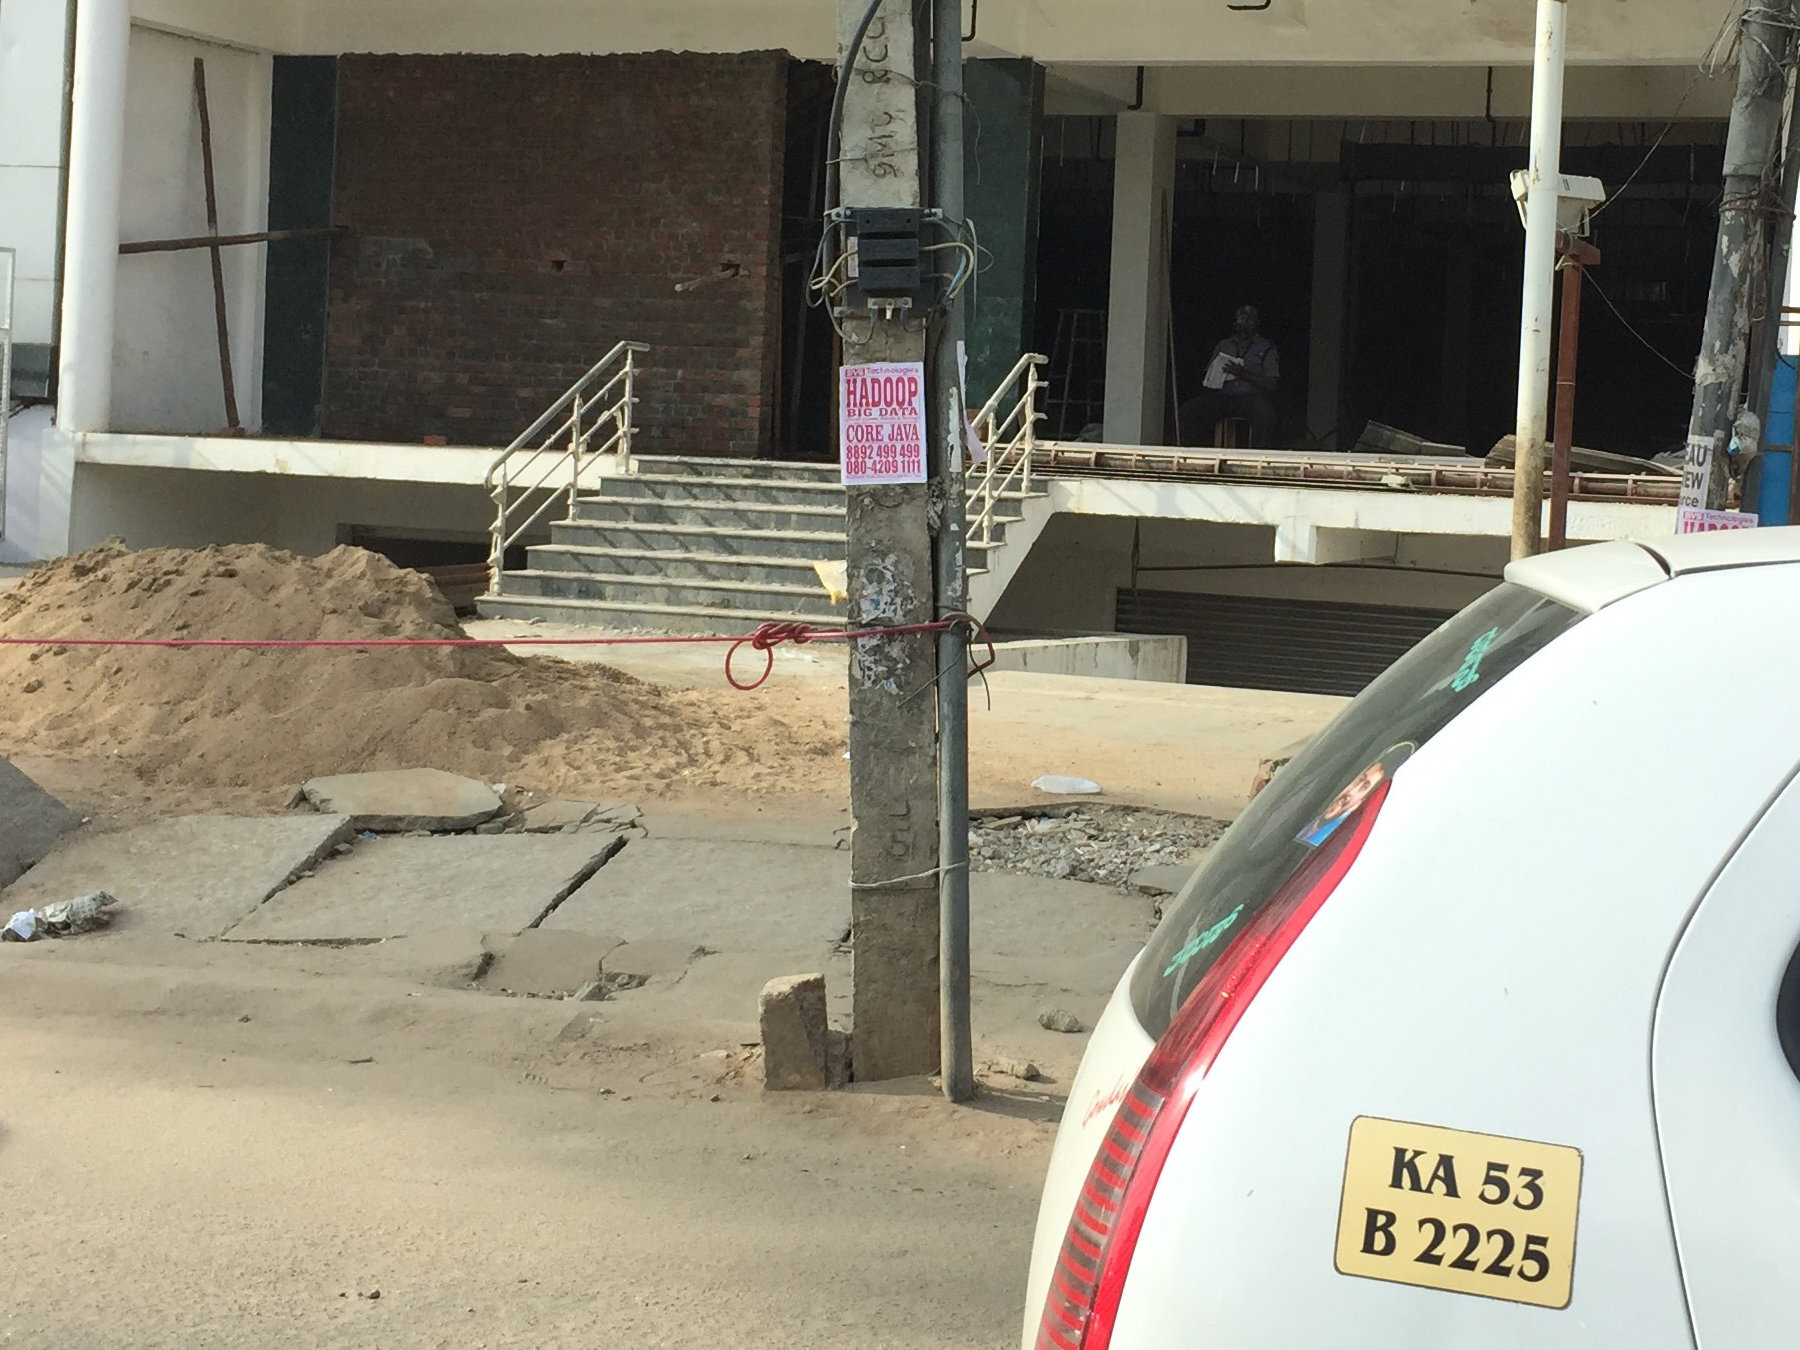 A lonely sign on a Bangalore utility pole offers Hadoop training